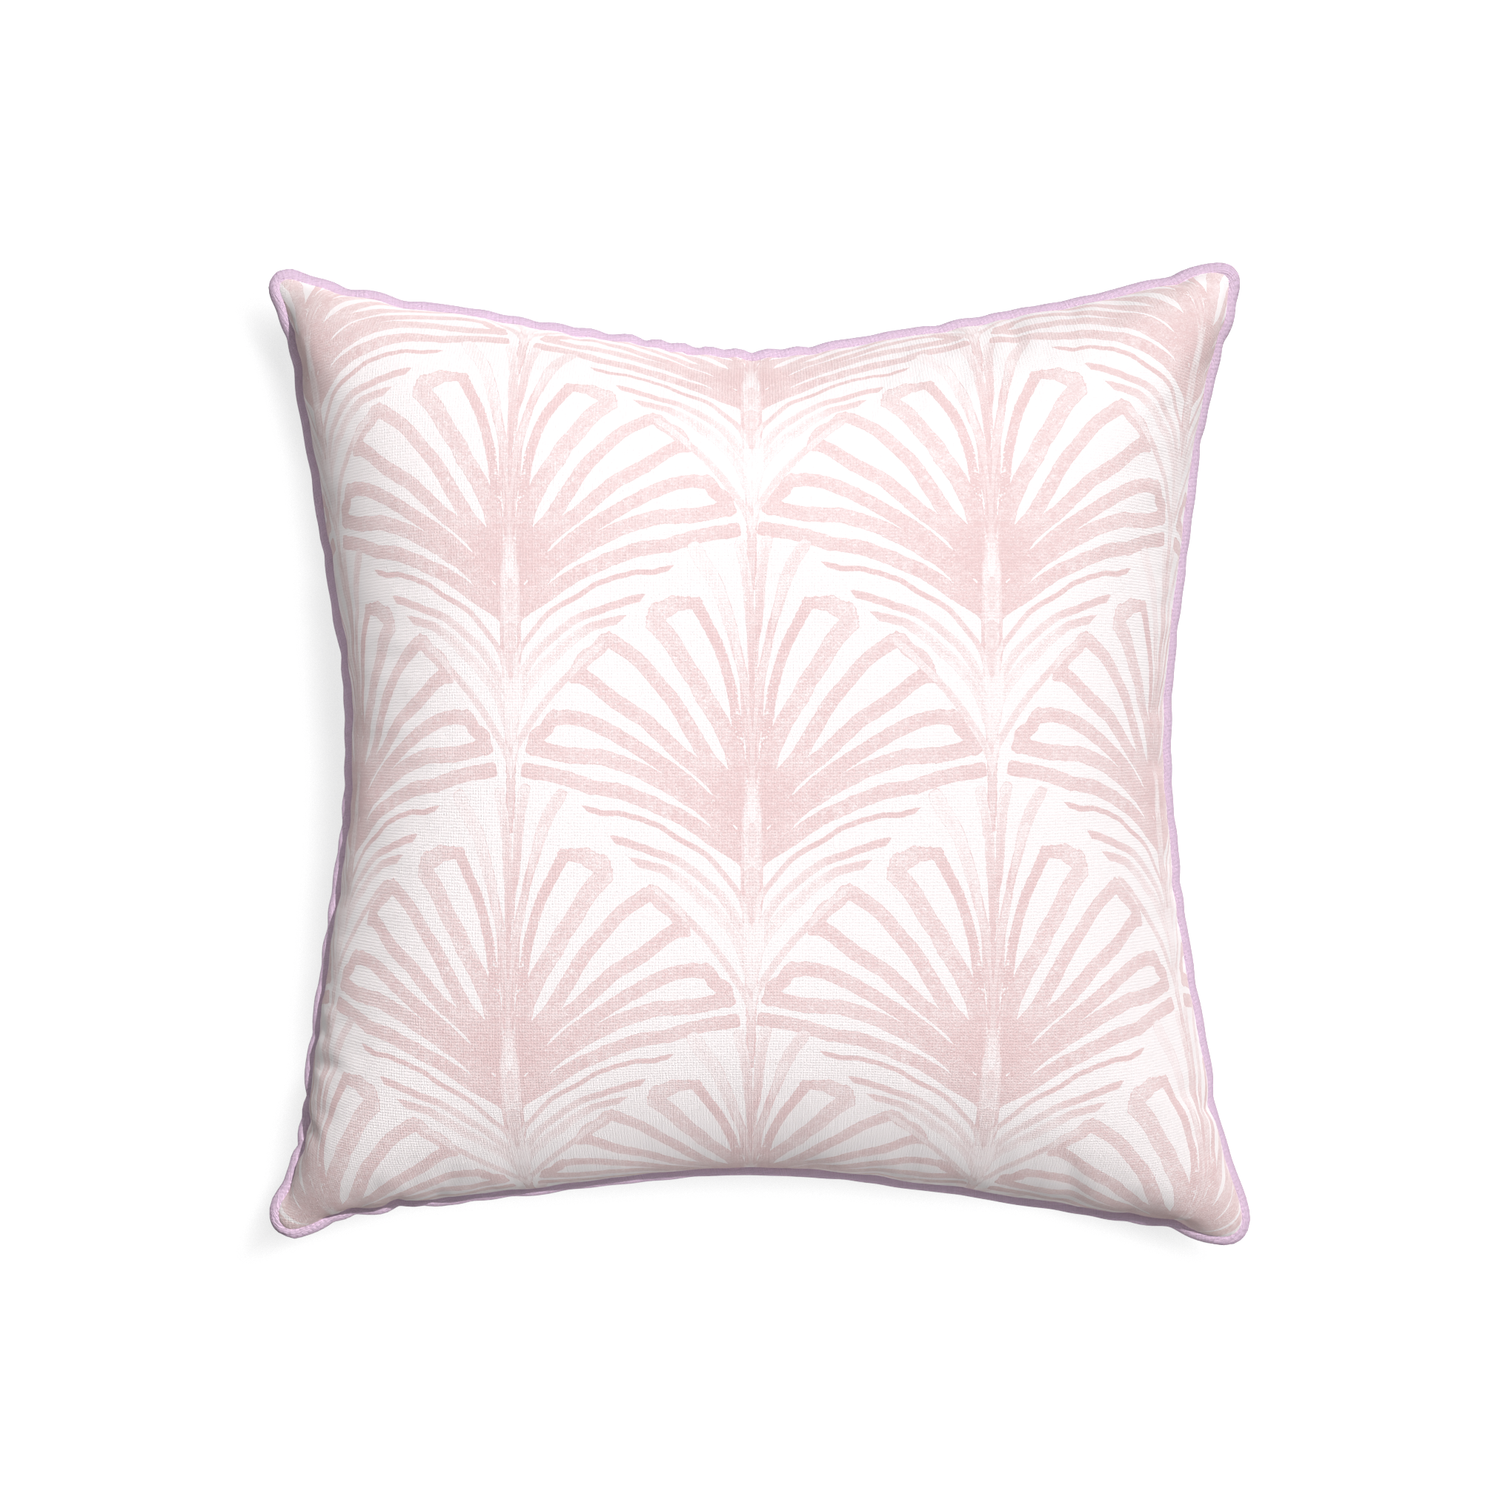 22-square suzy rose custom pillow with l piping on white background